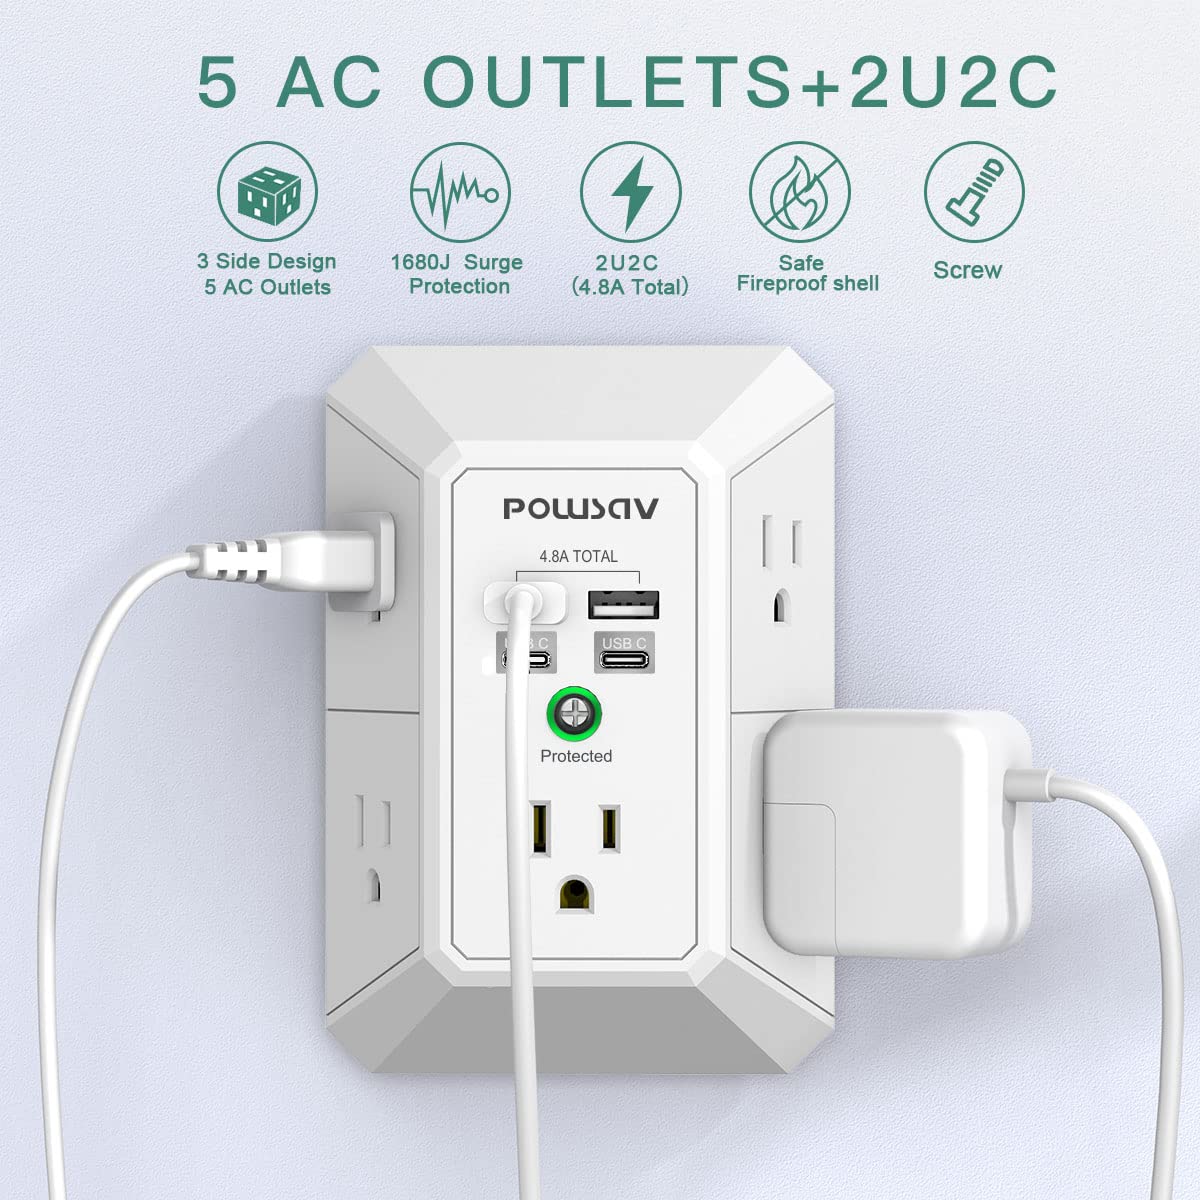 Outlet Extender USB Surge Protector - 3 Sided Power Strip Multi Plug Outlets Wall Adapter Spaced with 5-Outlet Splitter and 4 USB Ports (2 USB C Ports) for Home, Office, School, ETL Listed